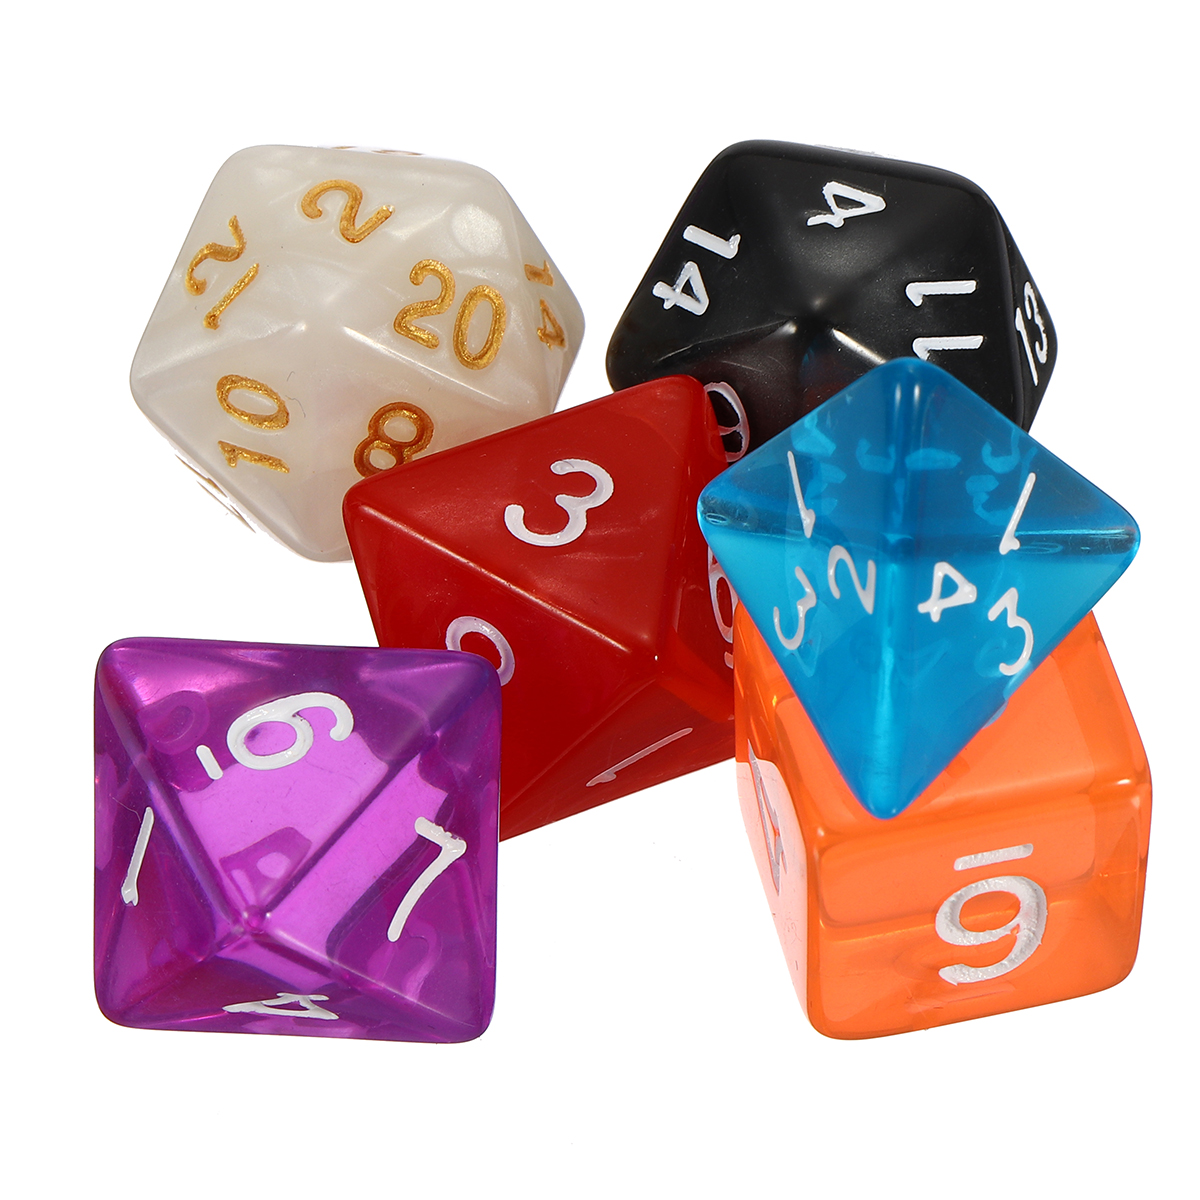 

42Pcs Multi Sided Acrylic Polyhedral Dice Set 6 Colors Role Playing Game Patry Gadget with Bags